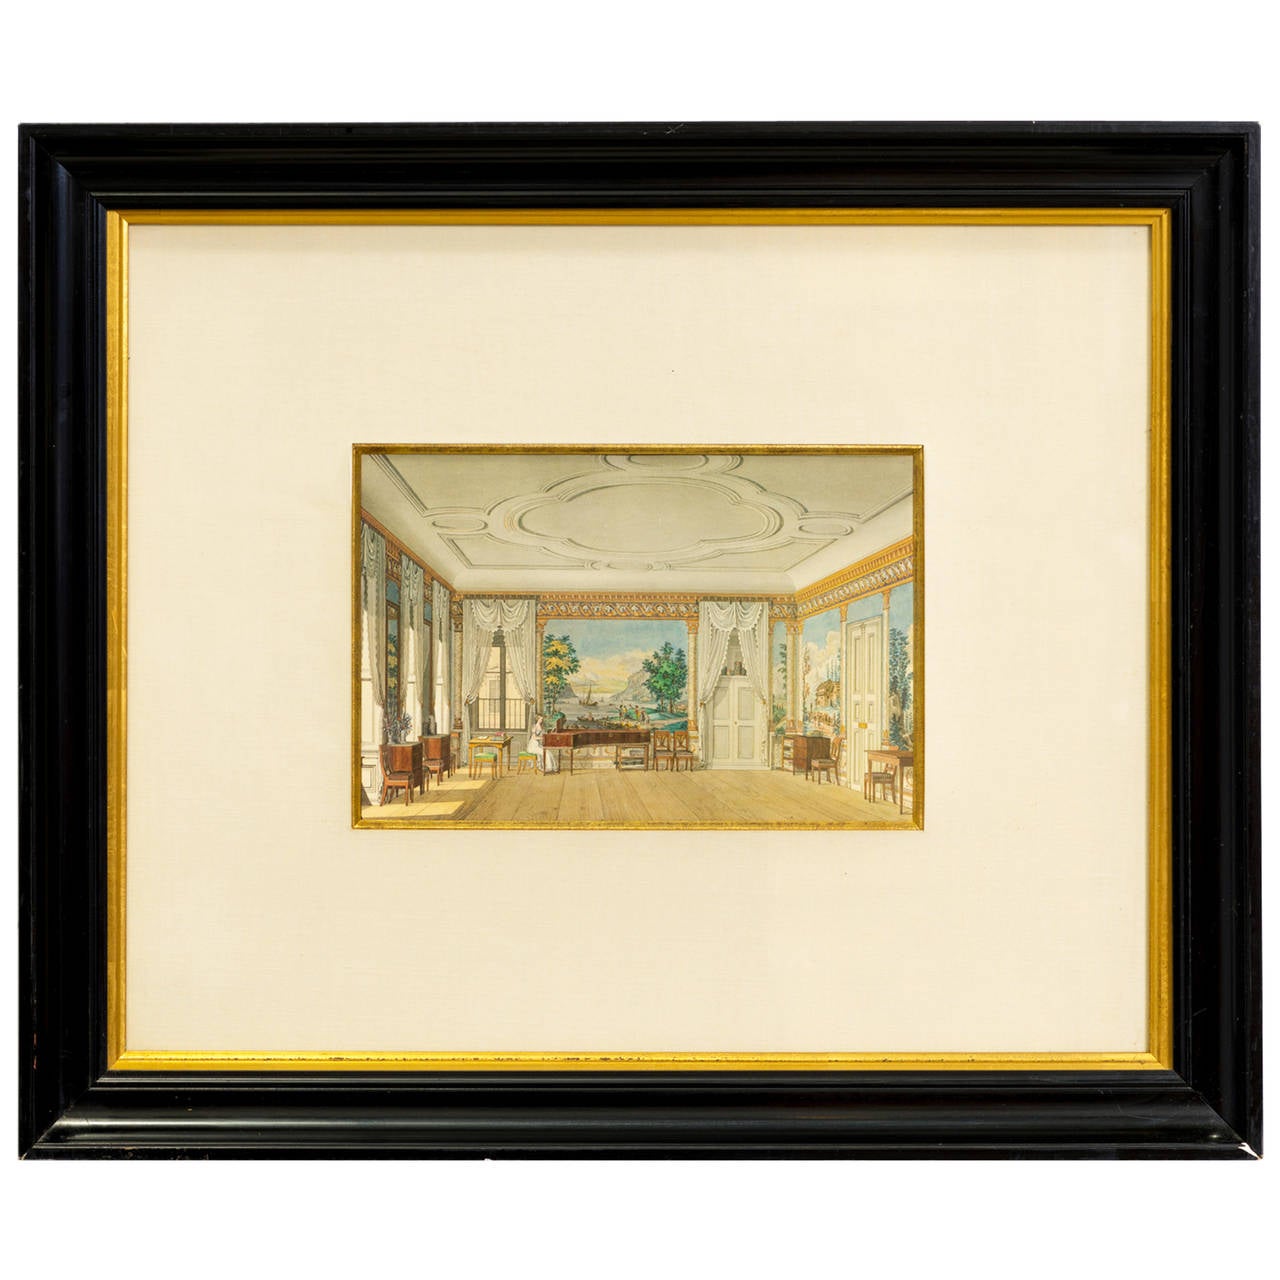 A set of nine 19th century interior scenes, framed and matted.